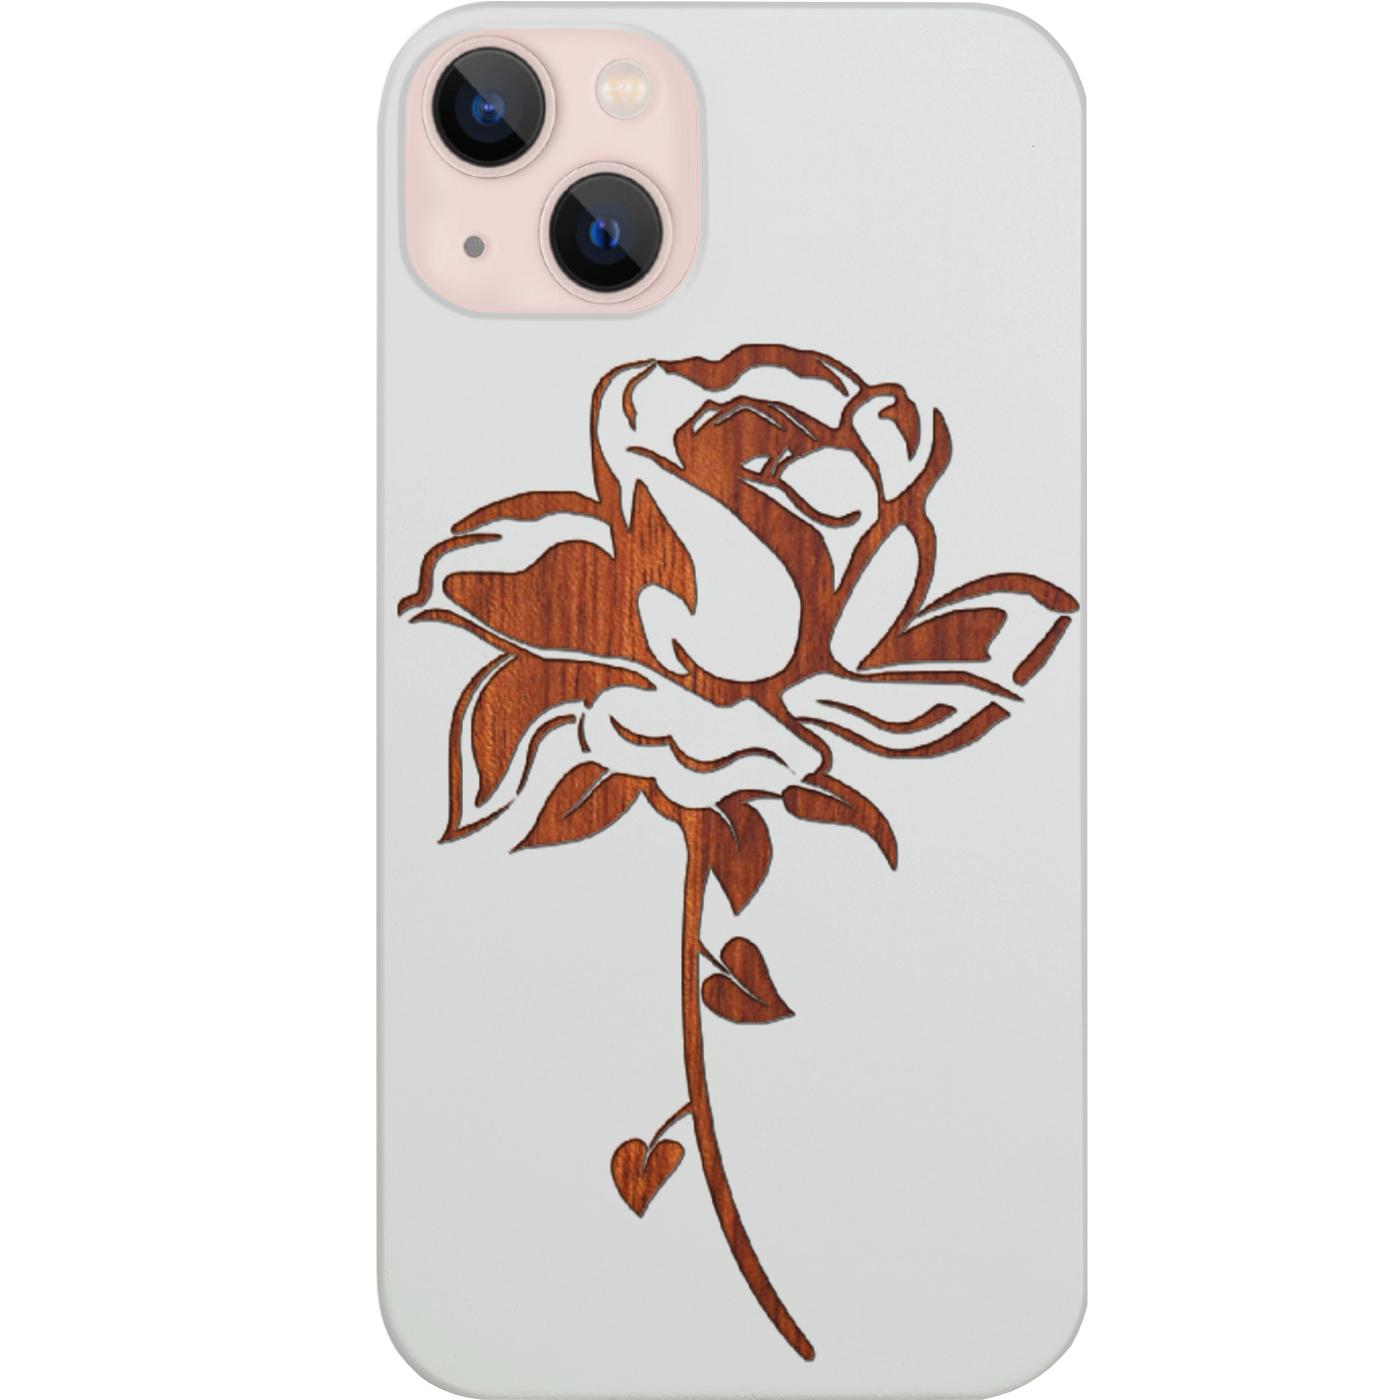 Rose with Leaf - Engraved Phone Case